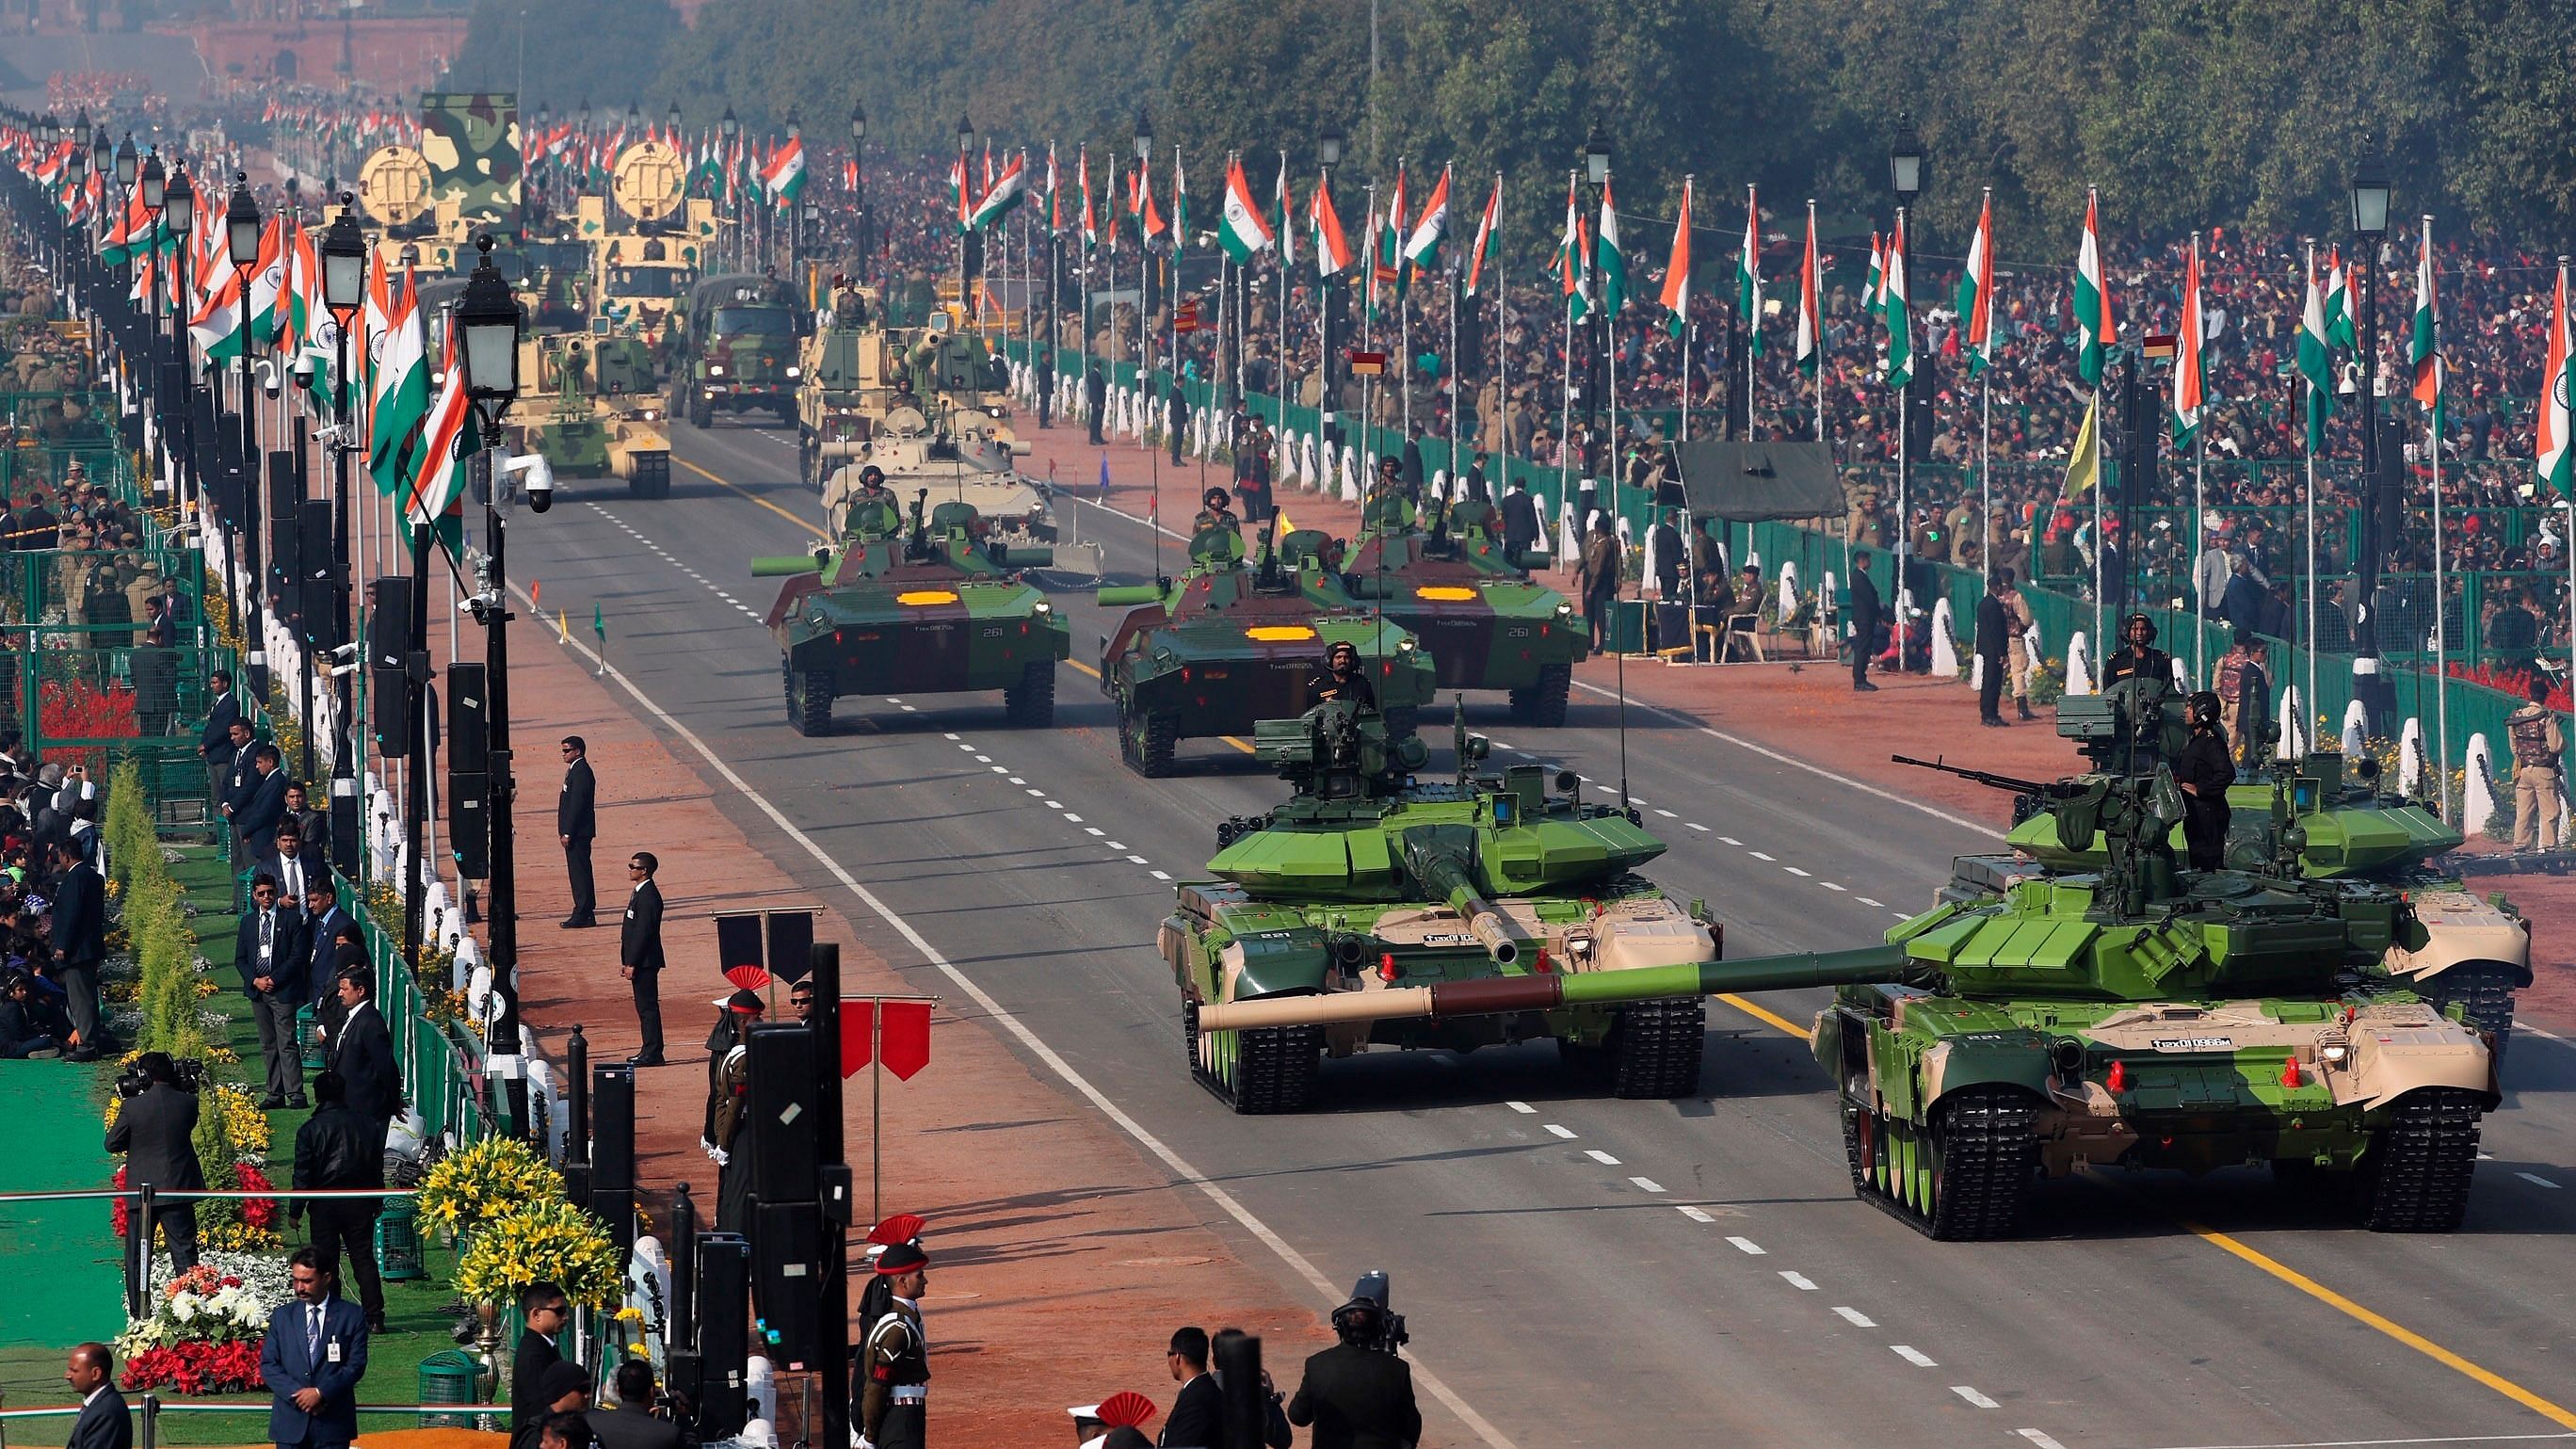 January Republic Day Image, Video, PM Modi Wishes LIVE: IWatch: India's Republic Day Parade at New Delhi's Rajpath Begins